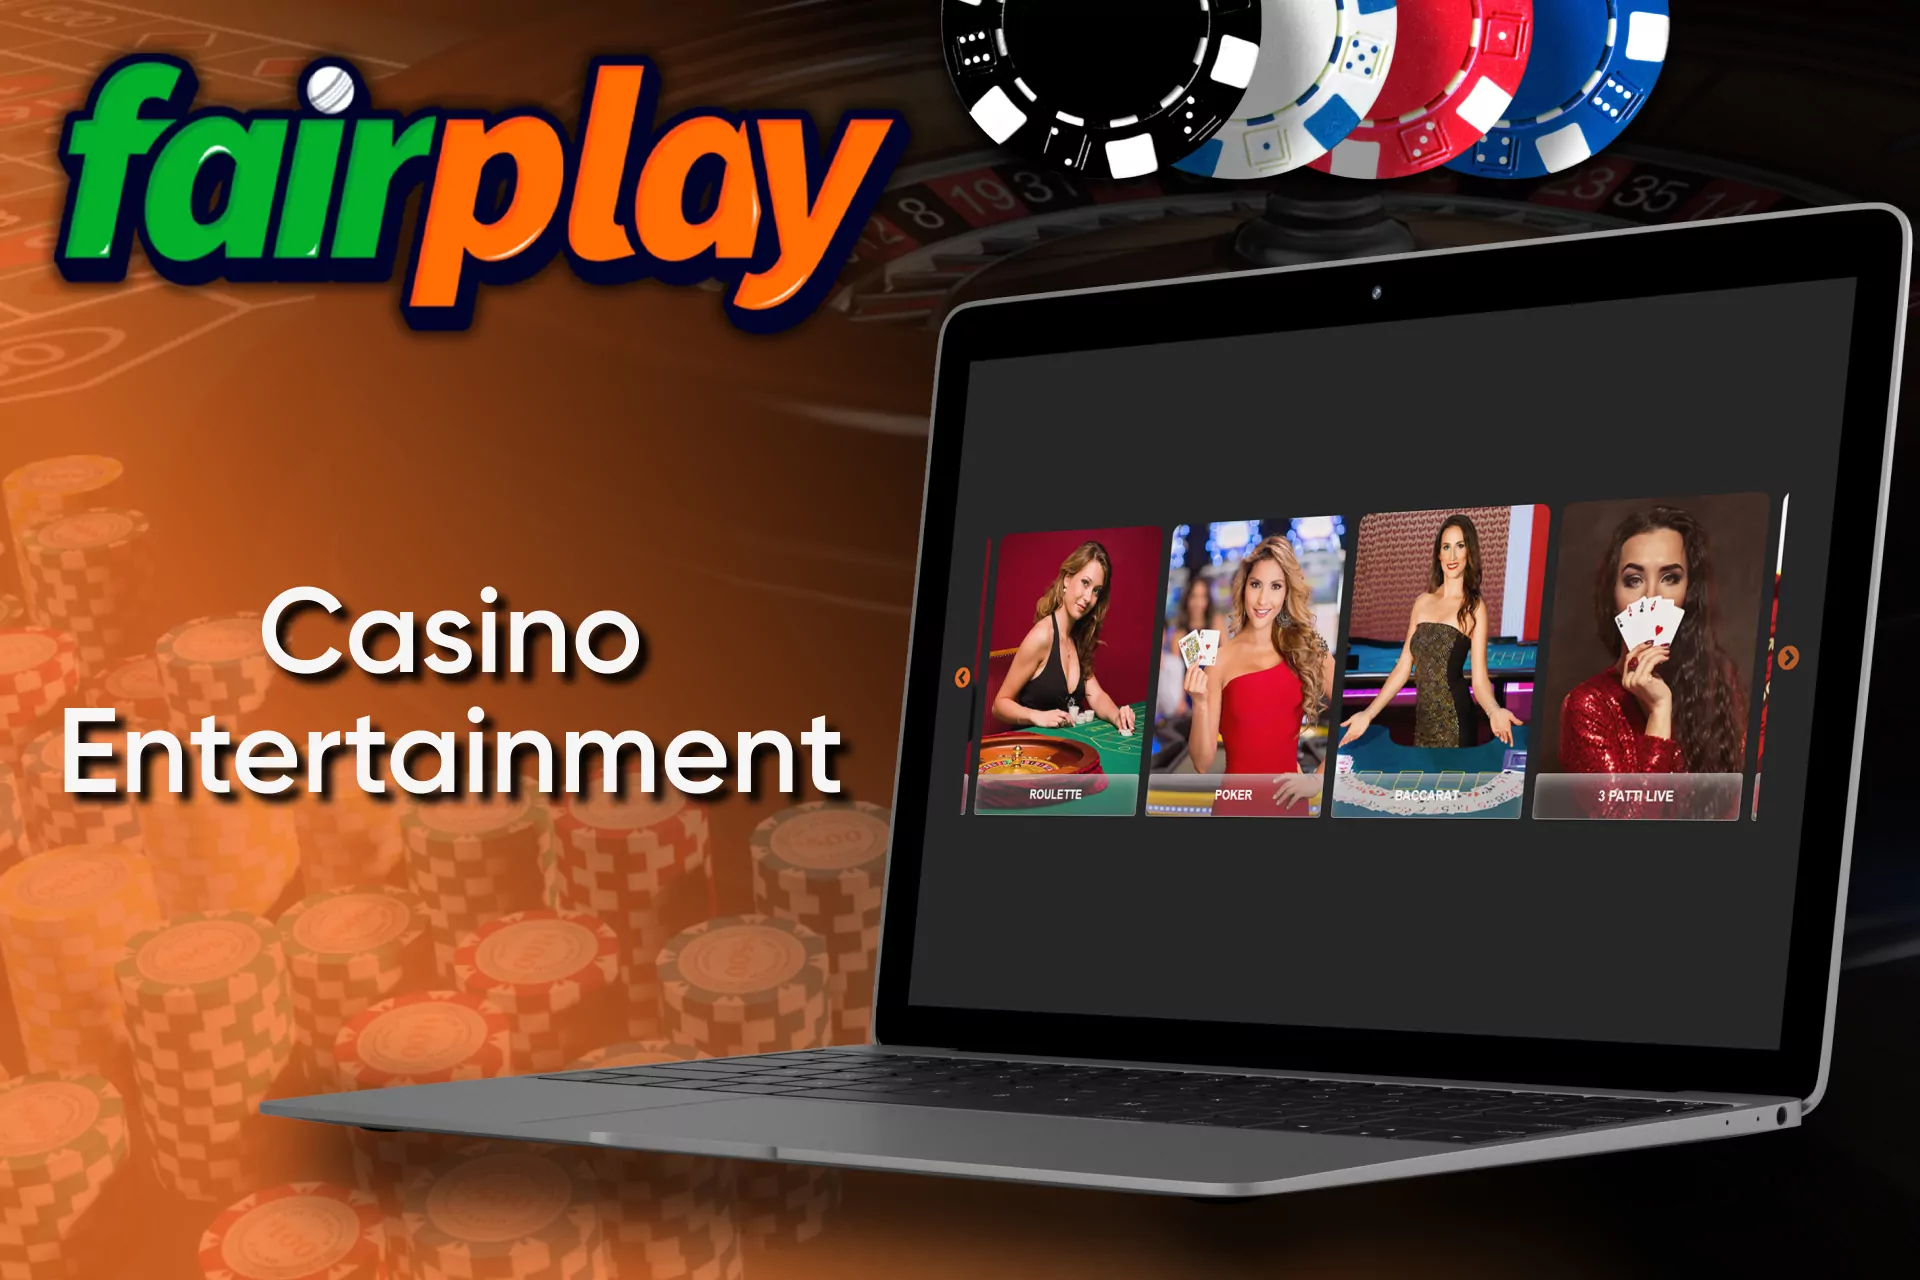 Besides betting on volleyball, you can play casino games on Fairplay.